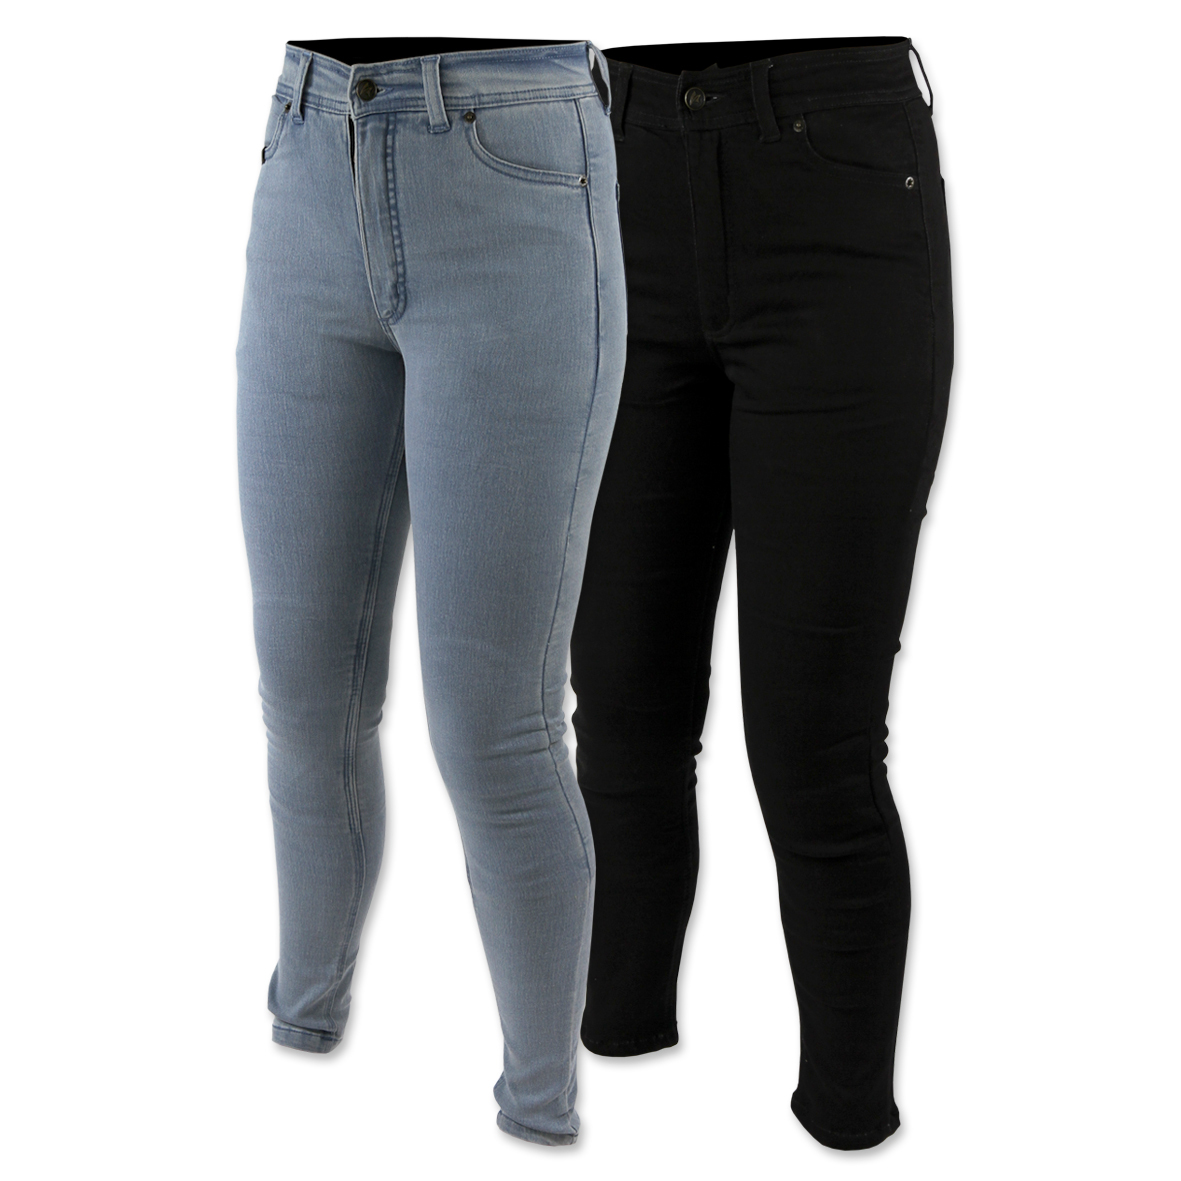 Are Jeggings the proper bottom to wear in public instead of leggings? -  Quora